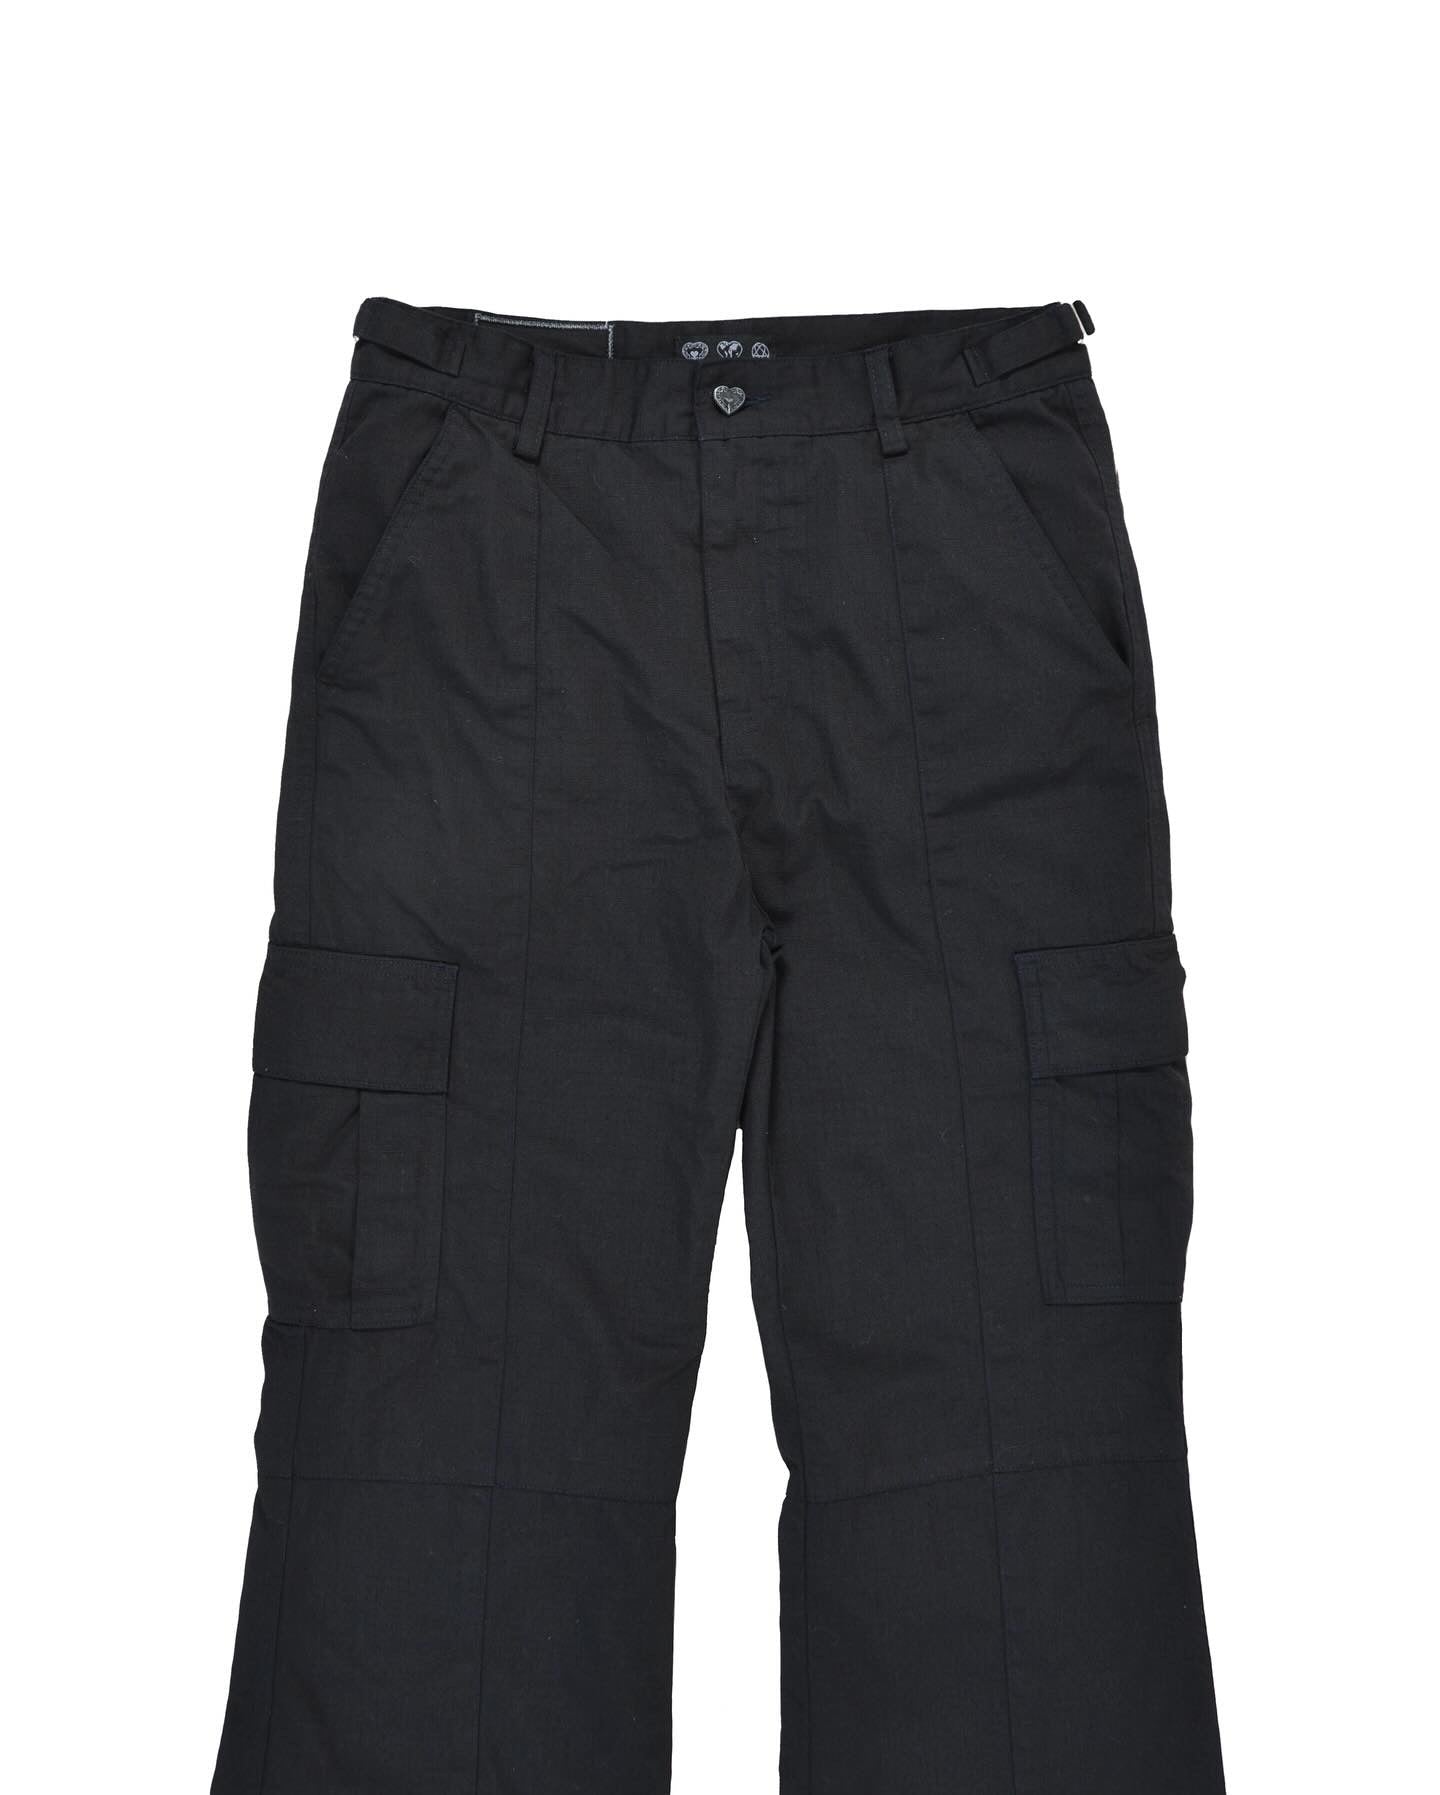 BLACK FLARED RIP STOP CARGO PANTS